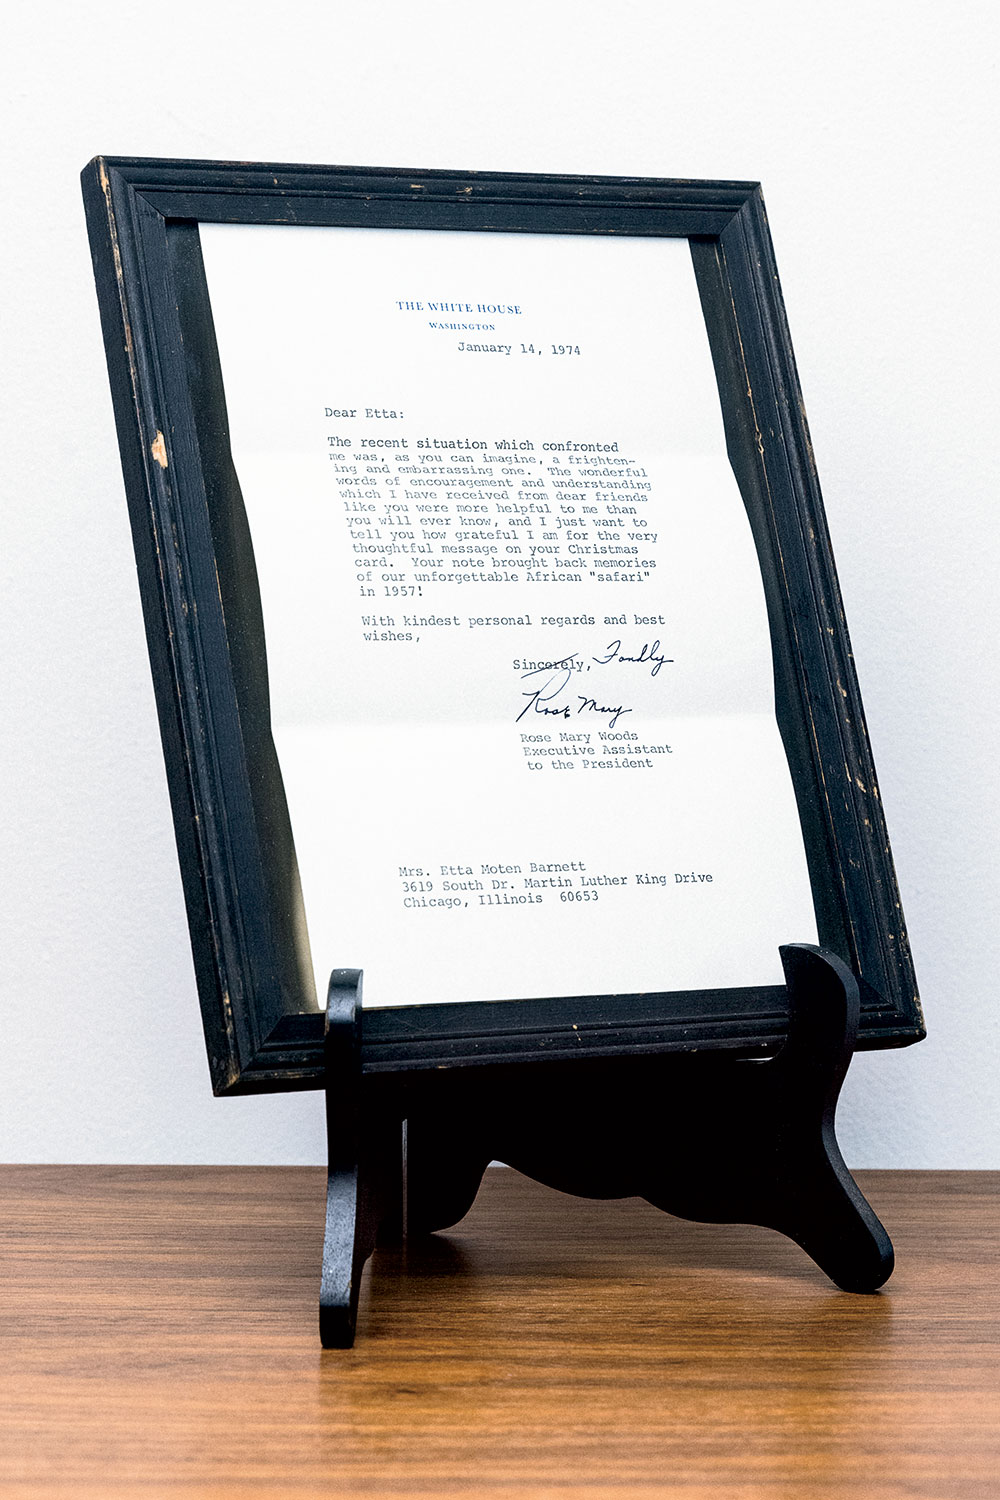 Watergate Letter